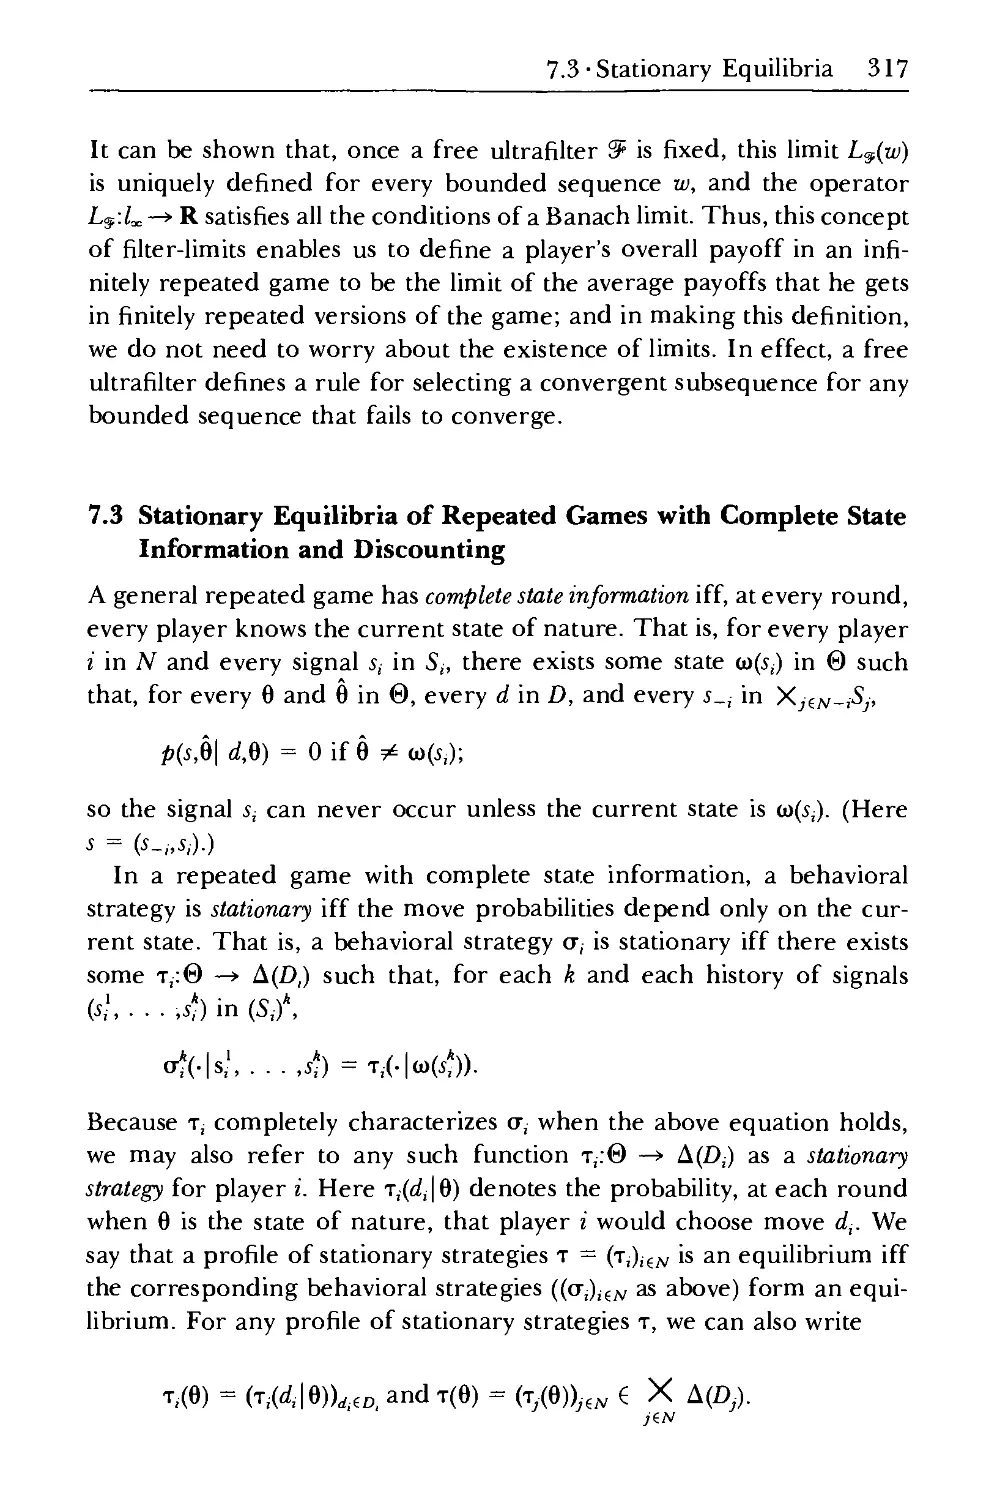 7.3 Stationary Equilibria of Repeated Gaines with Complete State Information and Discounting